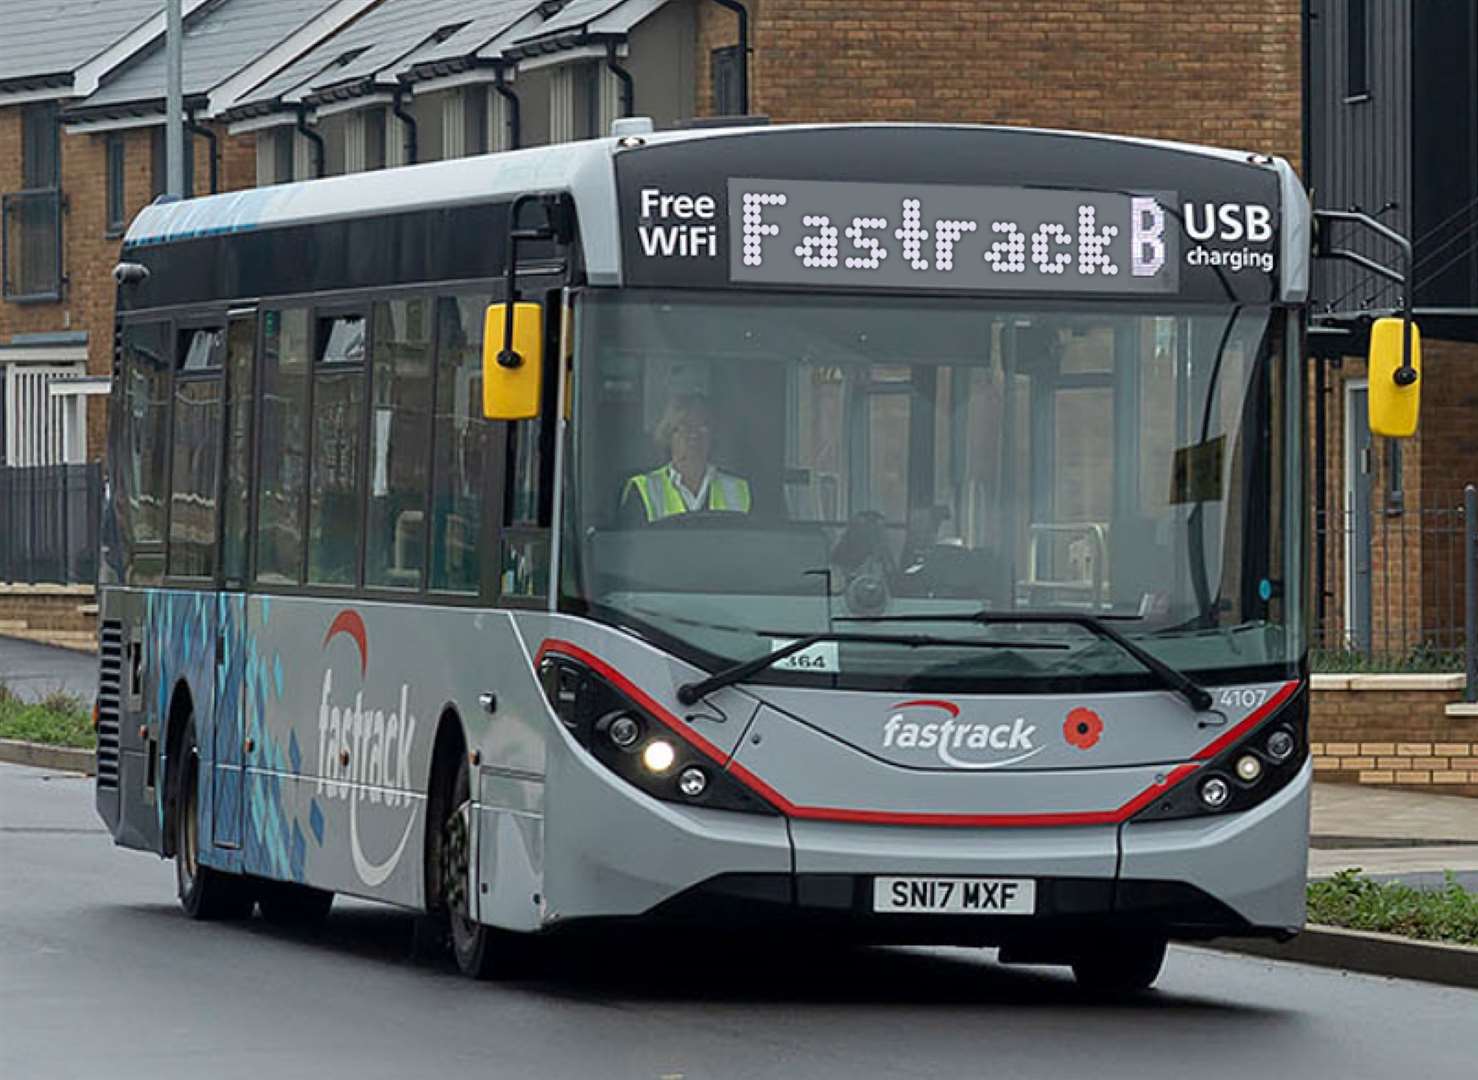 Dover Fastrack - Kent's first zero-emission bus service - will launch with diesel buses. Picture: Go Ahead